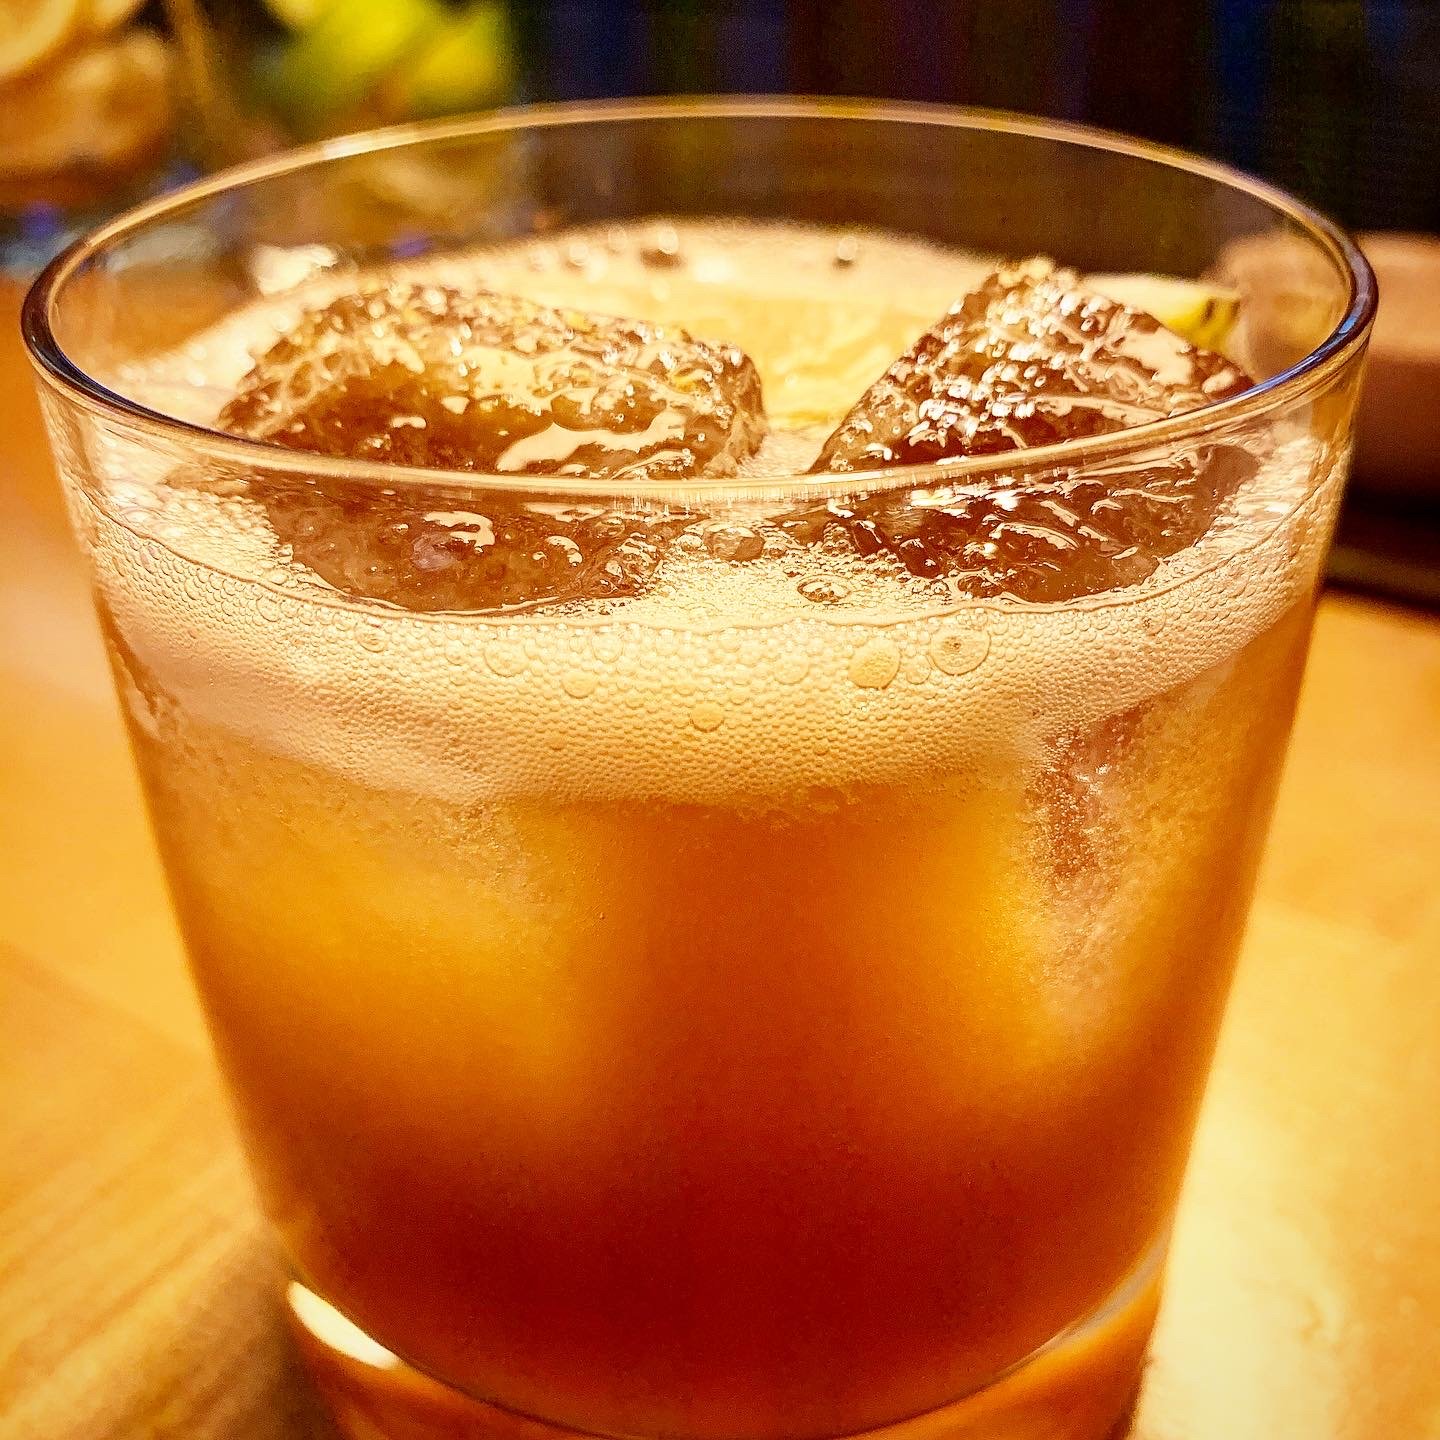 The Anything Goes cocktail from happy hour at The Honey Paw